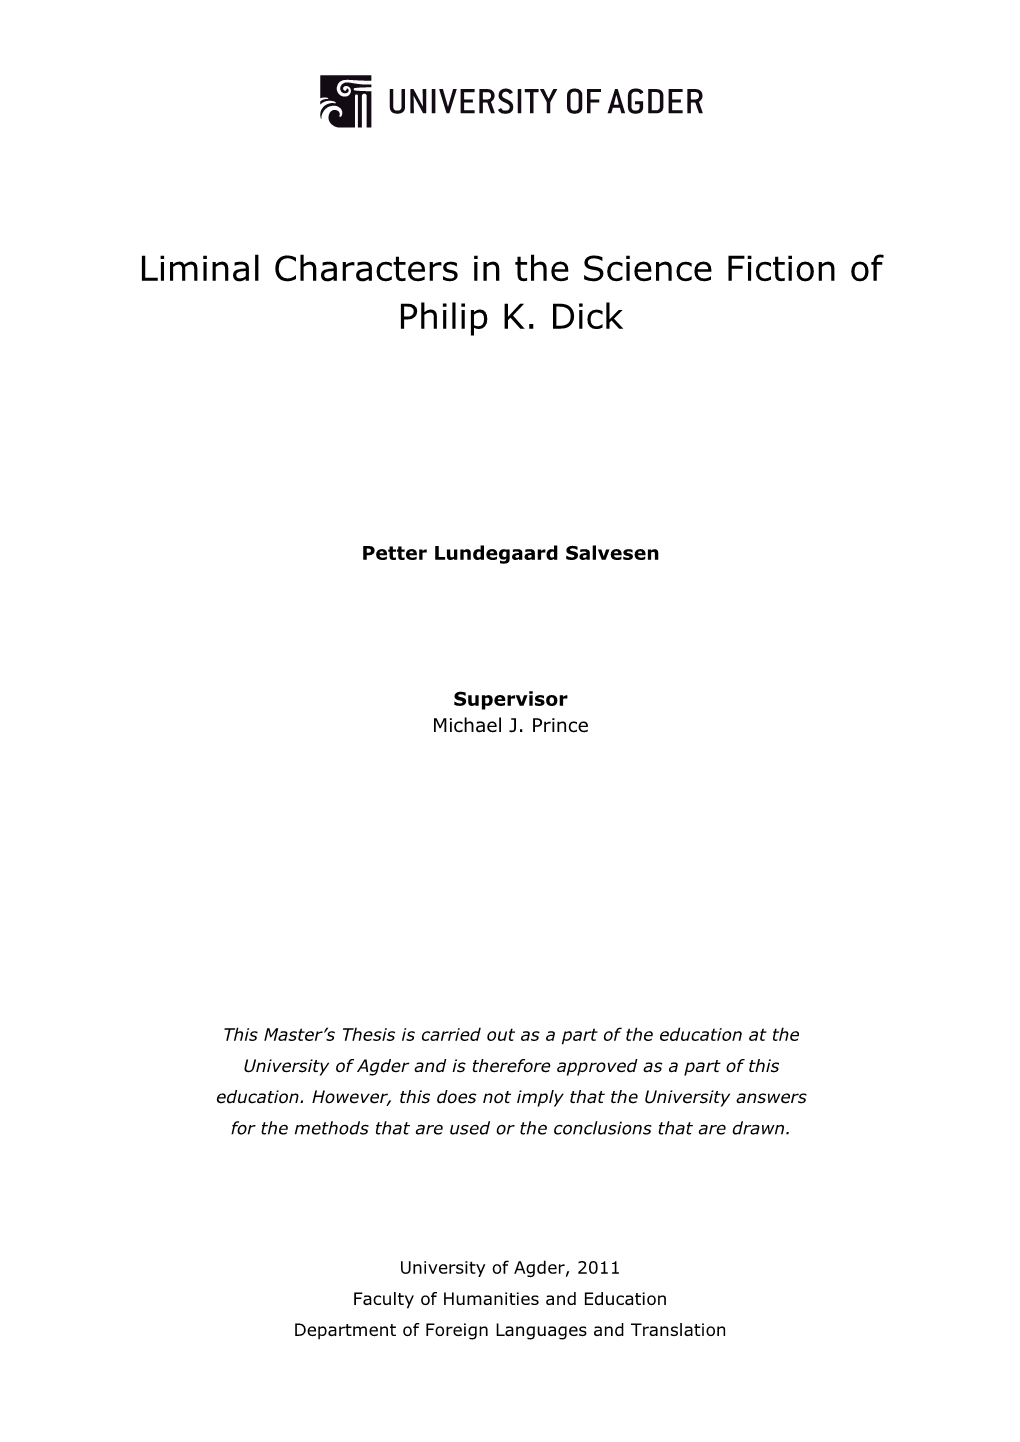 Liminal Characters in the Science Fiction of Philip K. Dick